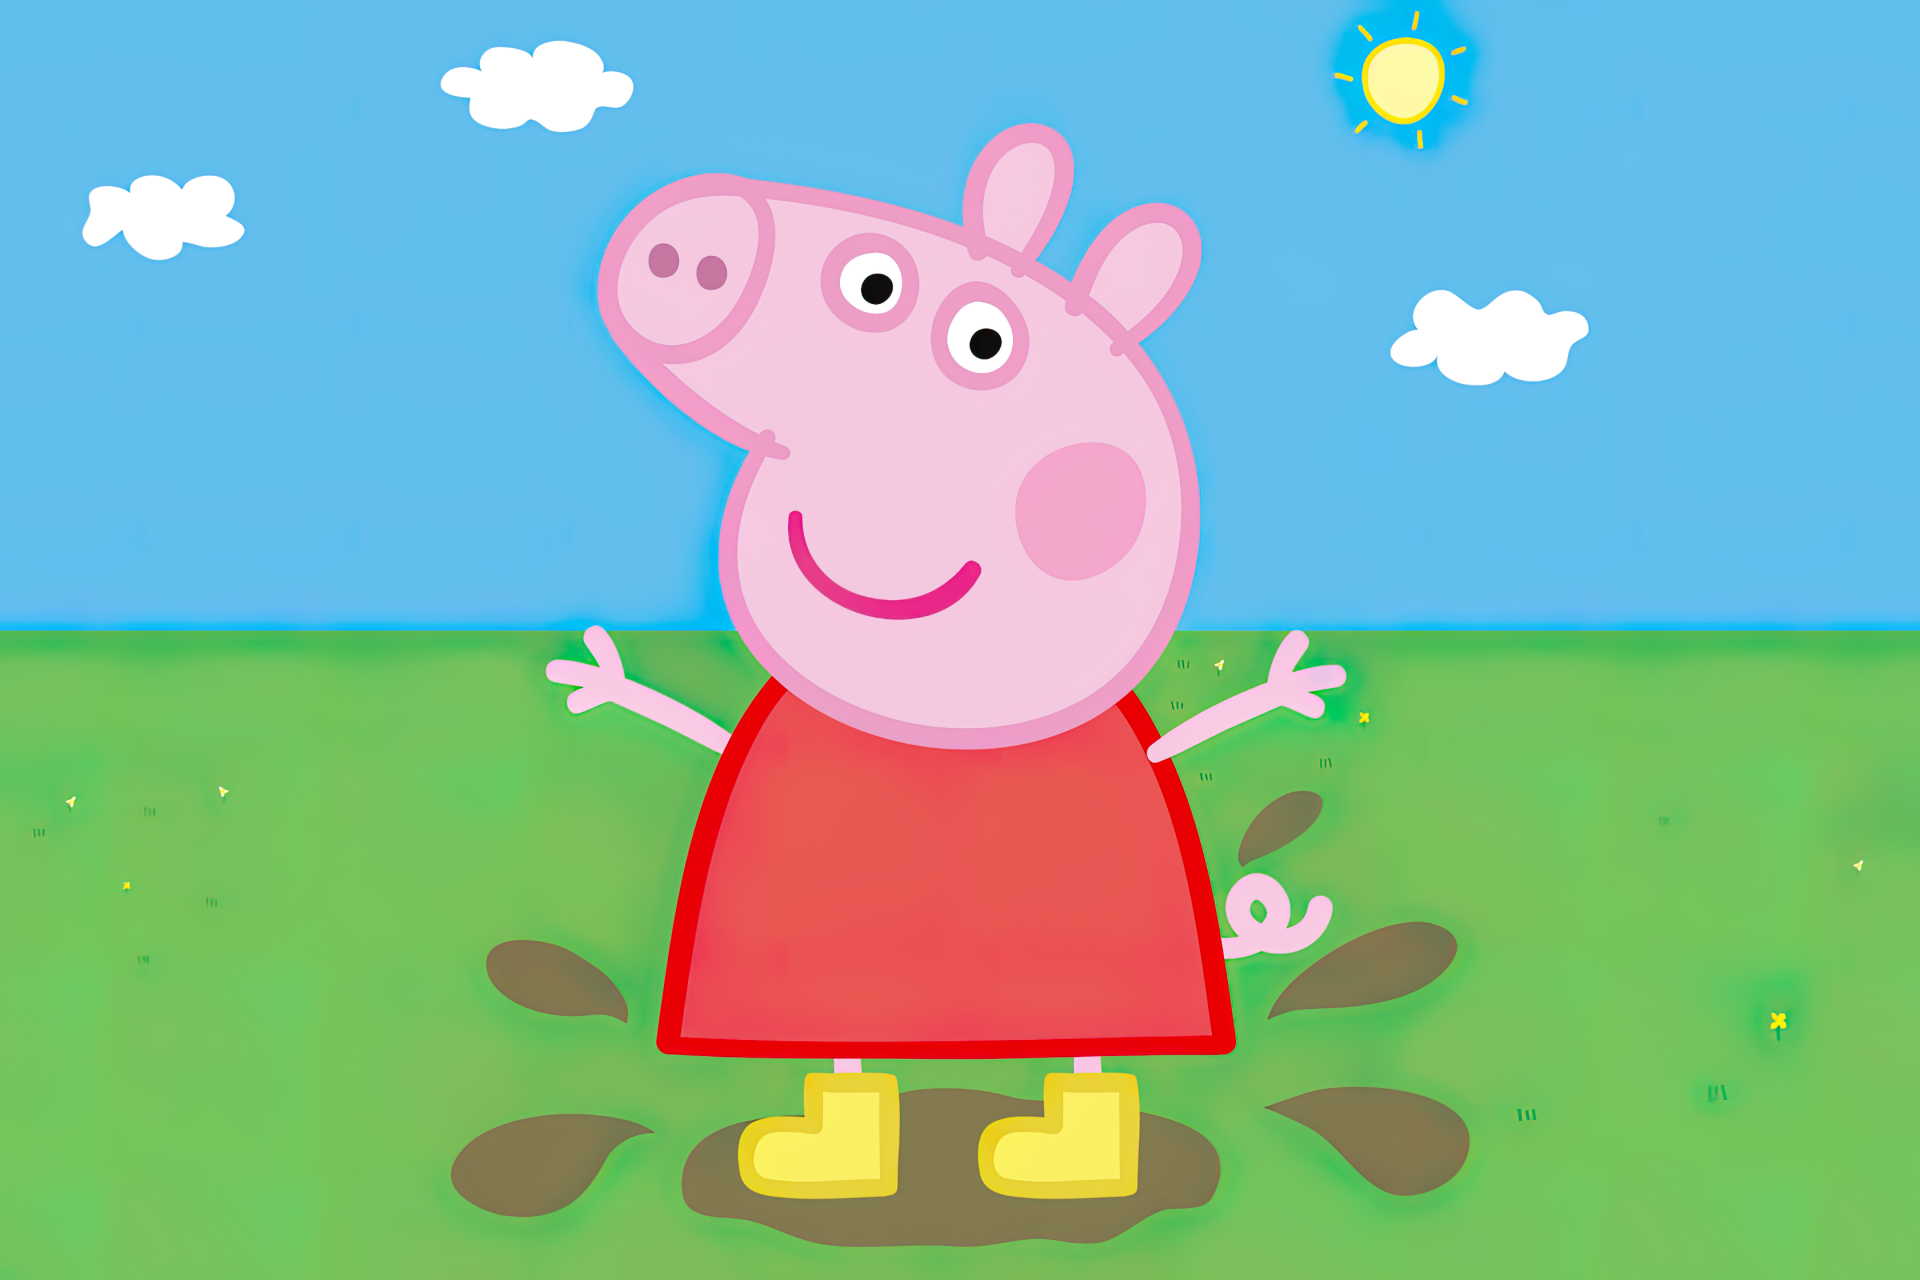 HD desktop wallpaper featuring the animated character Peppa Pig standing on grass with a sunny sky backdrop.